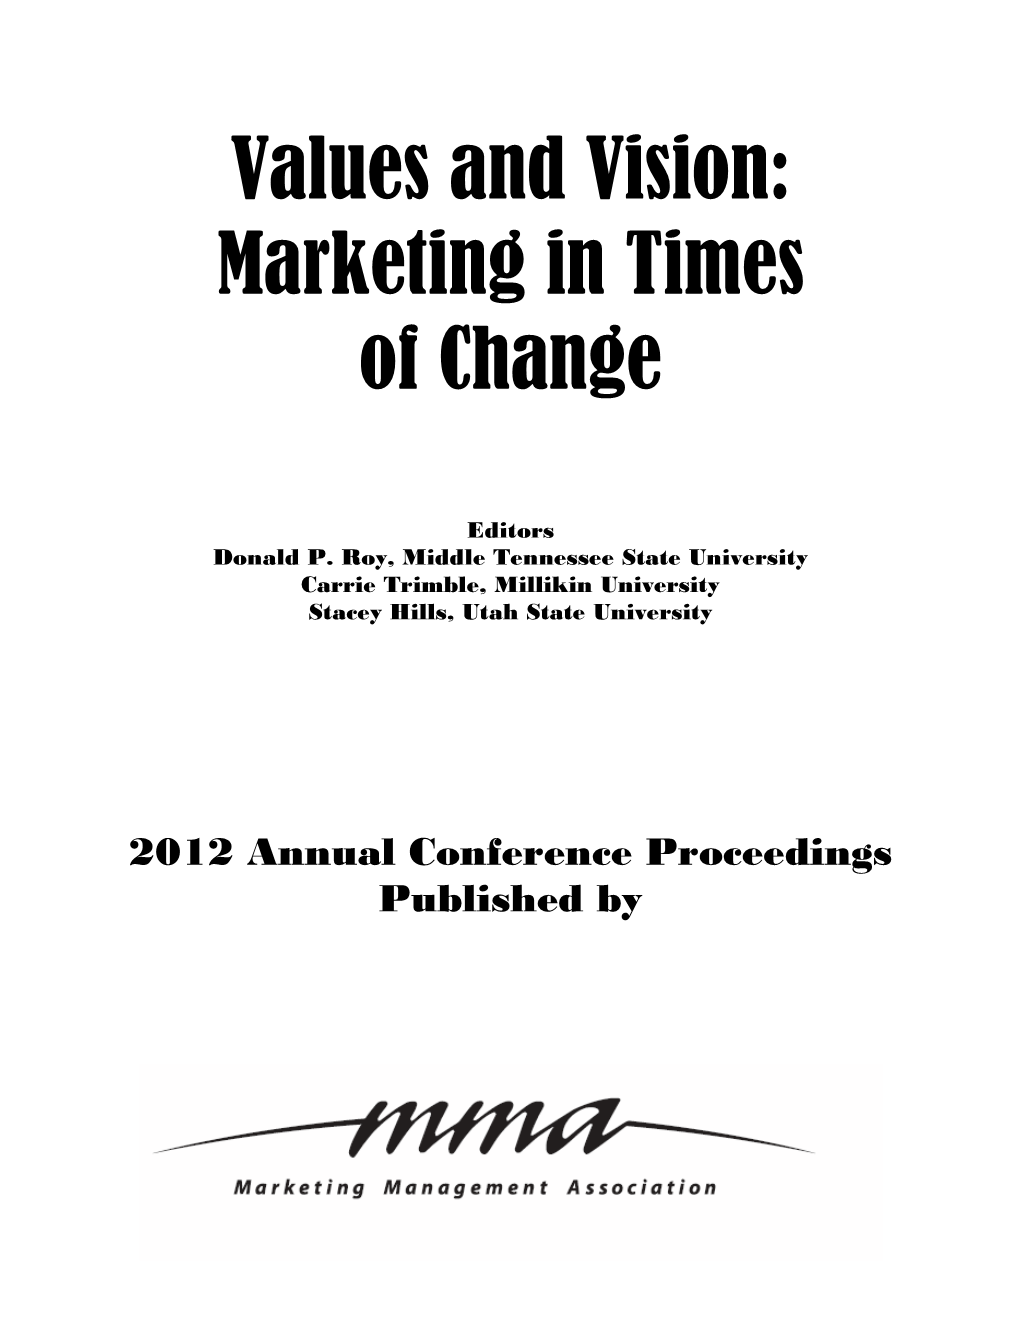 Values and Vision: Marketing in Times of Change